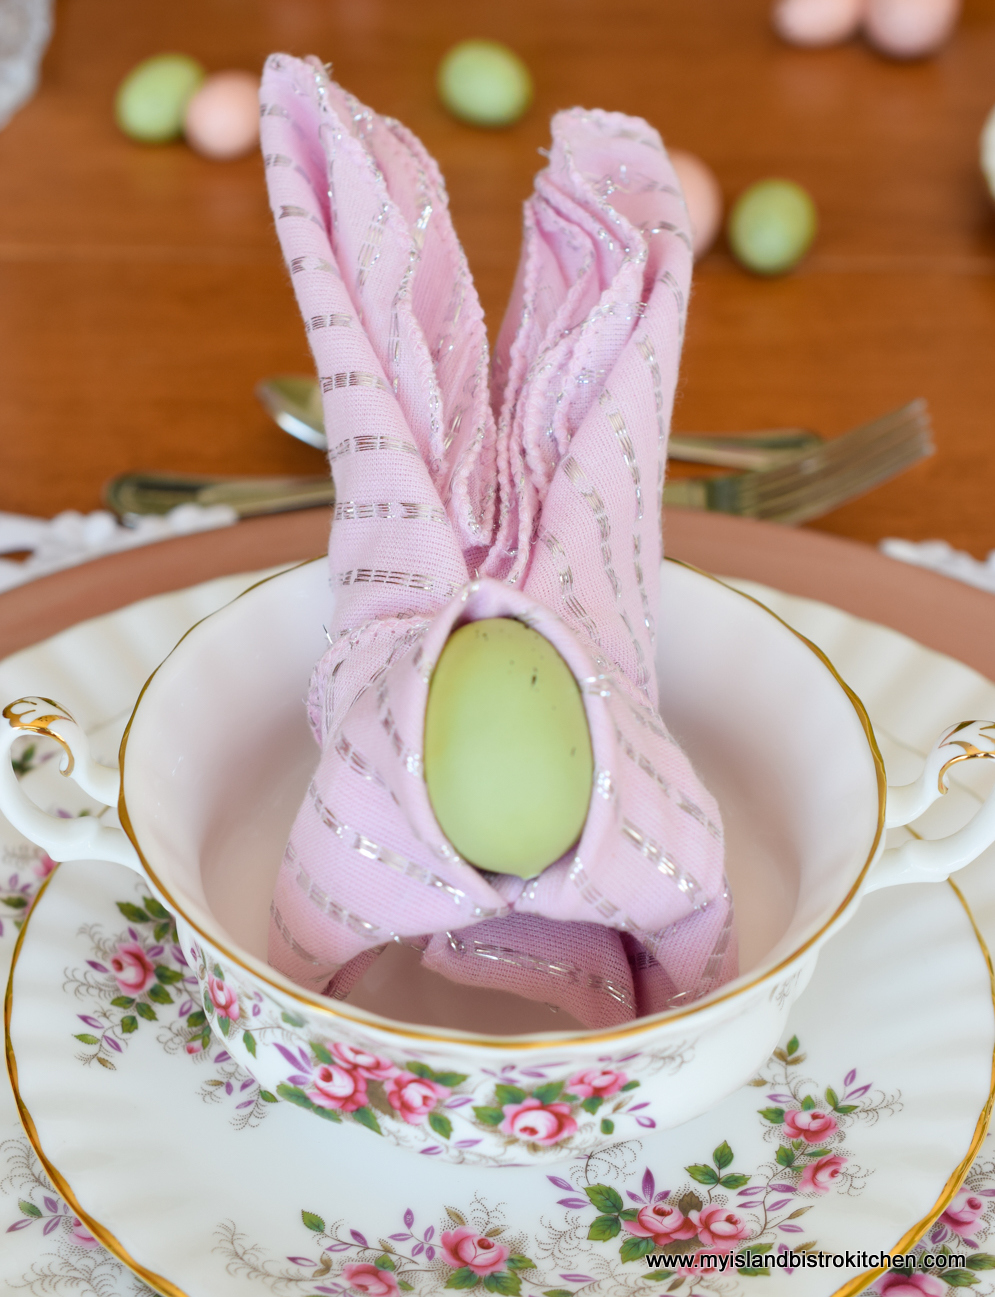 Pink napkin is folded into the shape of bunny ears and placed inside a soup bowl at an Easter-themed tablescape